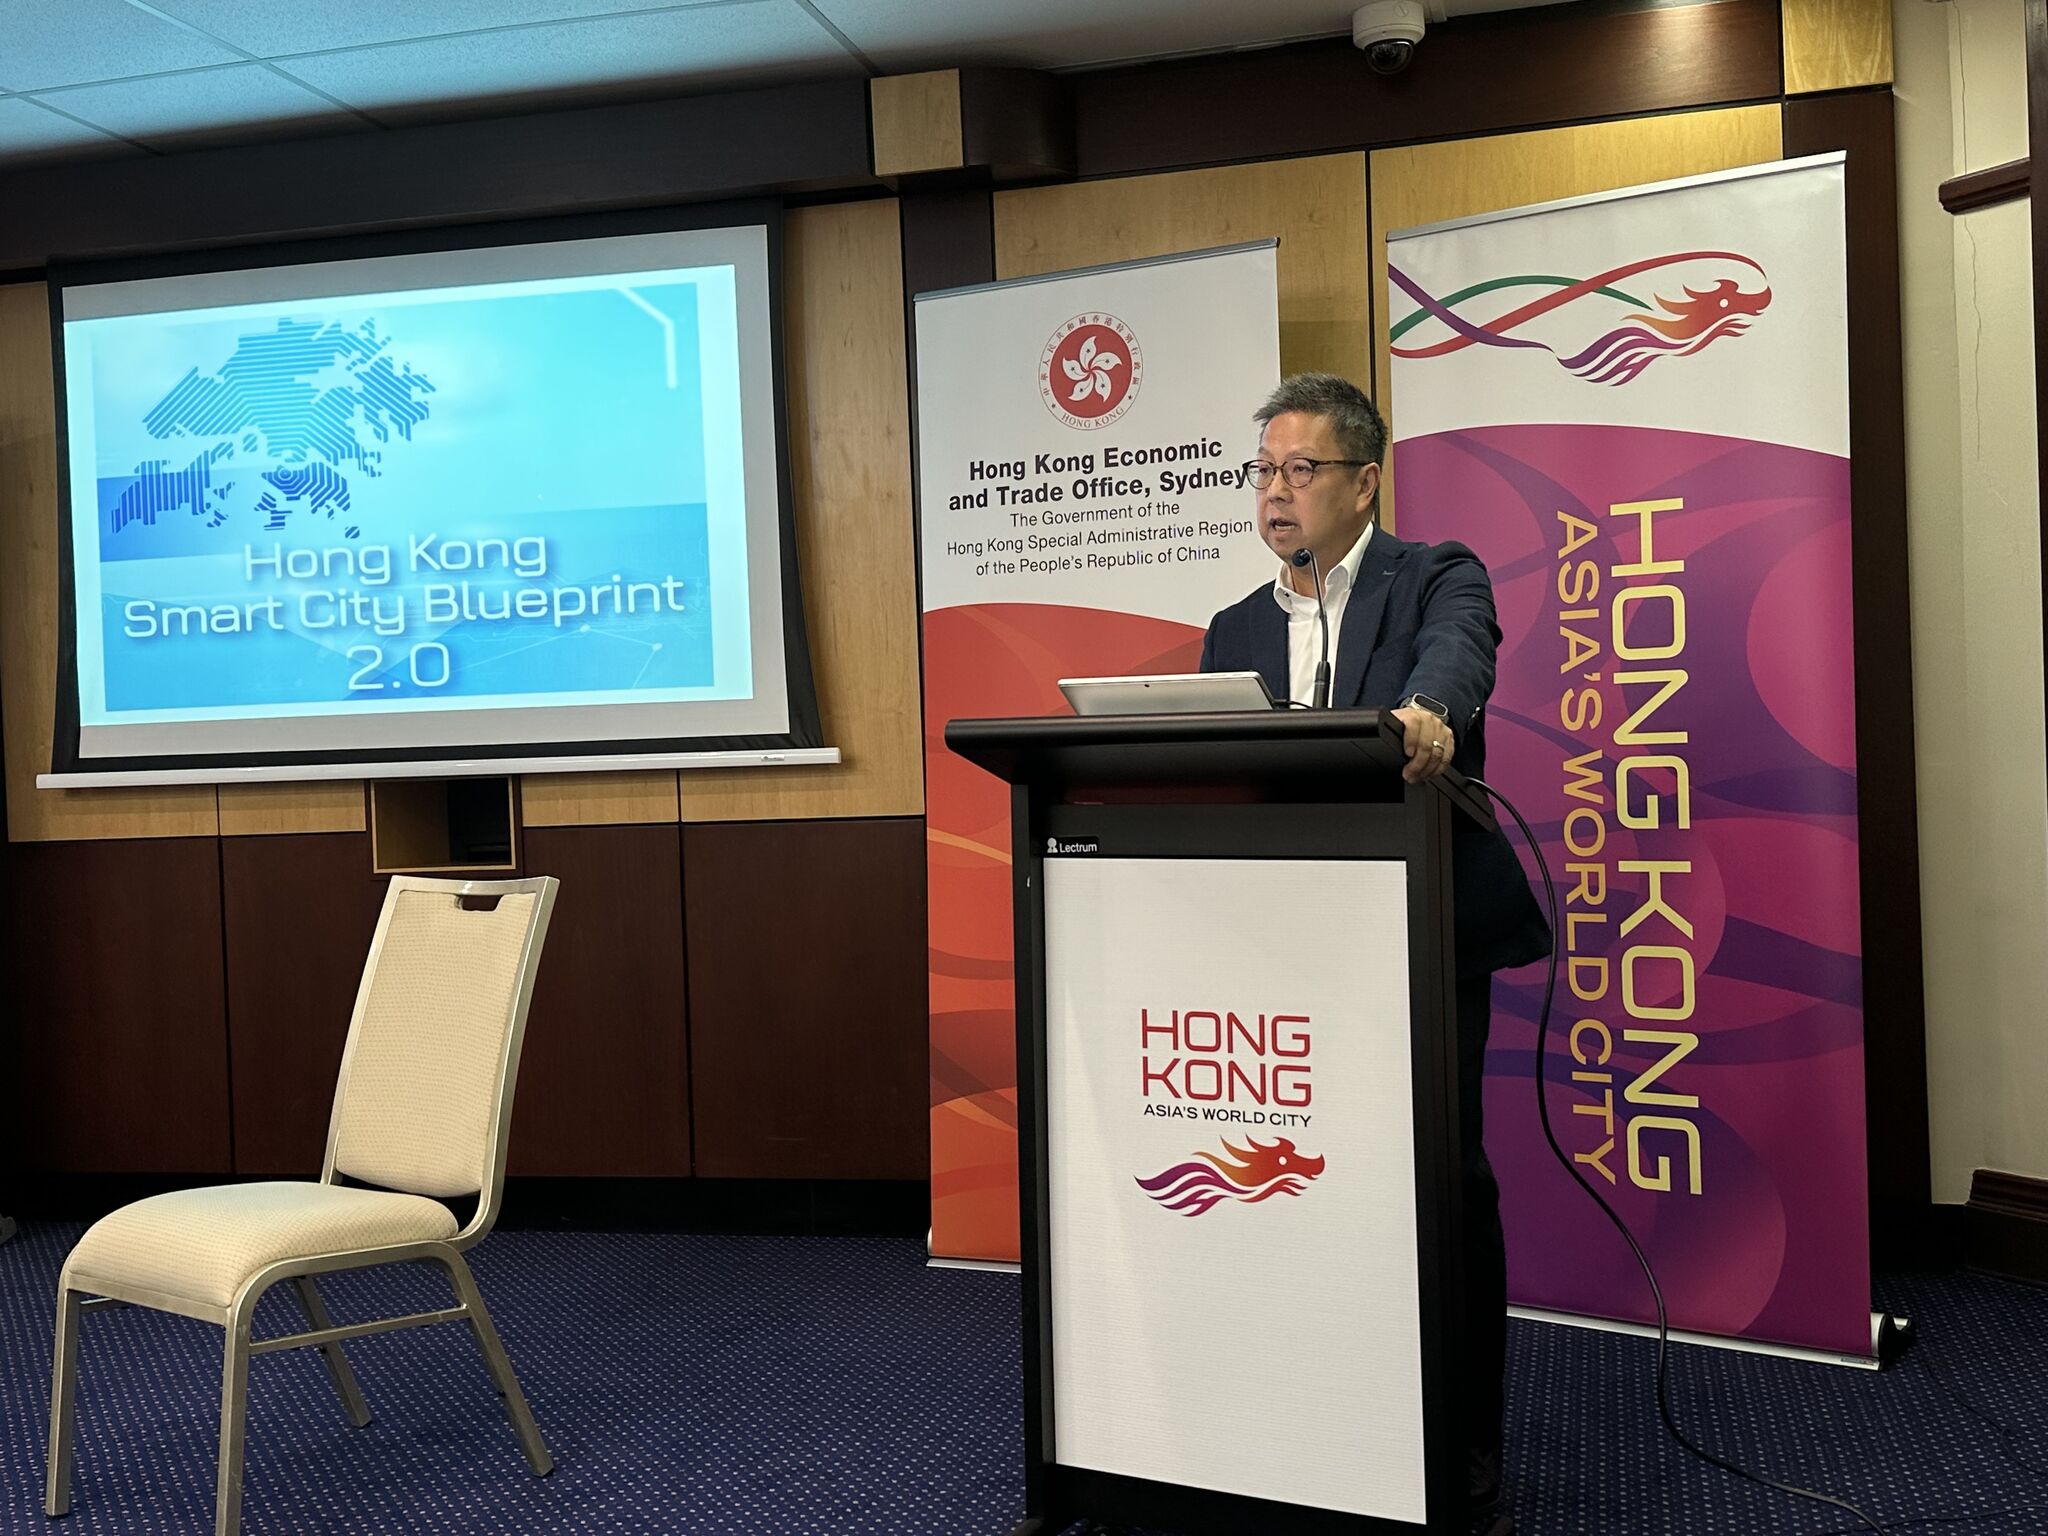 HKUST co-hosted a seminar with the Hong Kong Trade Development Council (HKTDC) and the Hong Kong Economic and Trade Office (HKETO), with Prof. Hong LO as the keynote speaker.